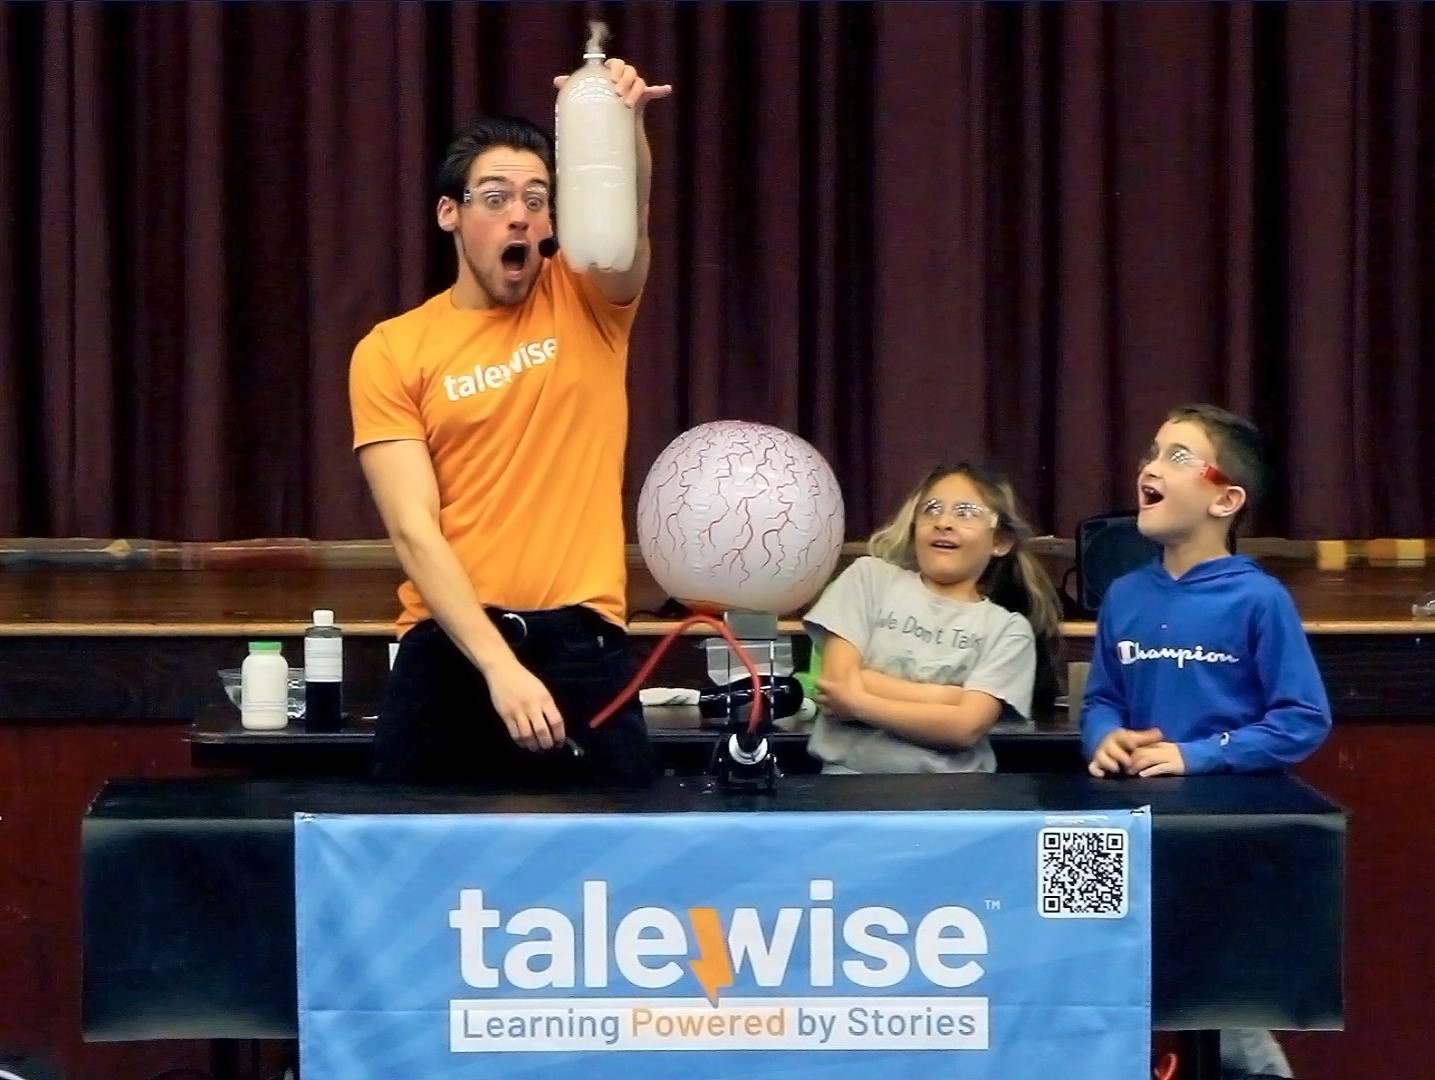 A performer from Talewise Science Heroes holds up a clear plastic bottle full of smoke with a shocked expression. Two kids watch with surprise and excitement.